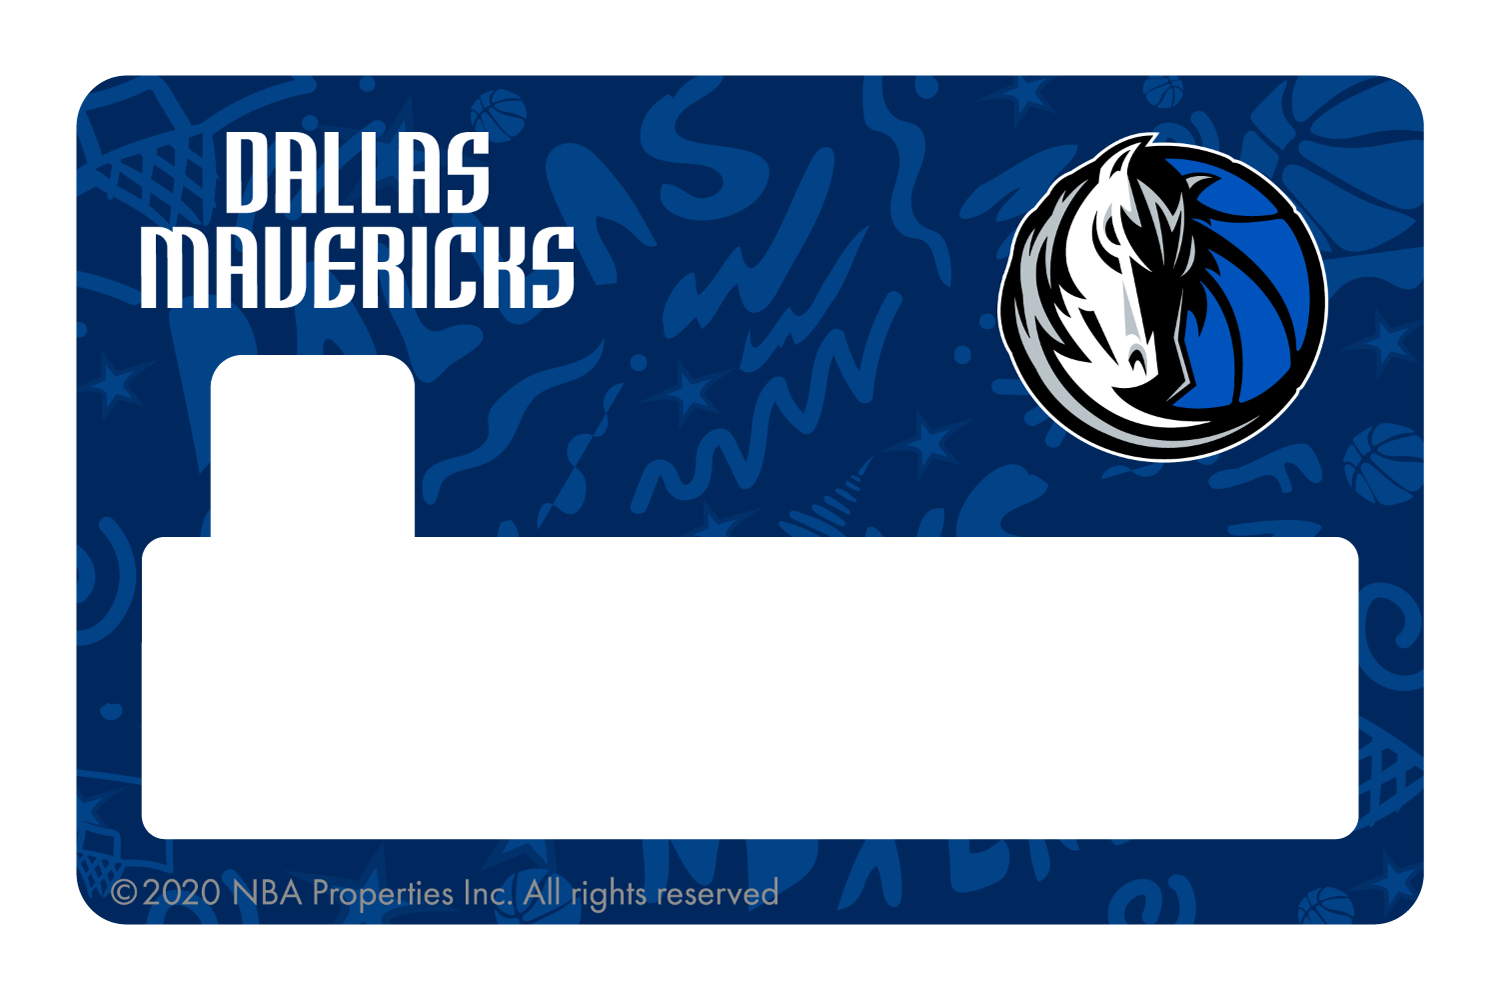 Credit Debit Card Skins | Cucu Covers - Customize Any Bank Card - Dallas Mavericks: Luka Doncic, Full Cover w/ Window / Small Chip